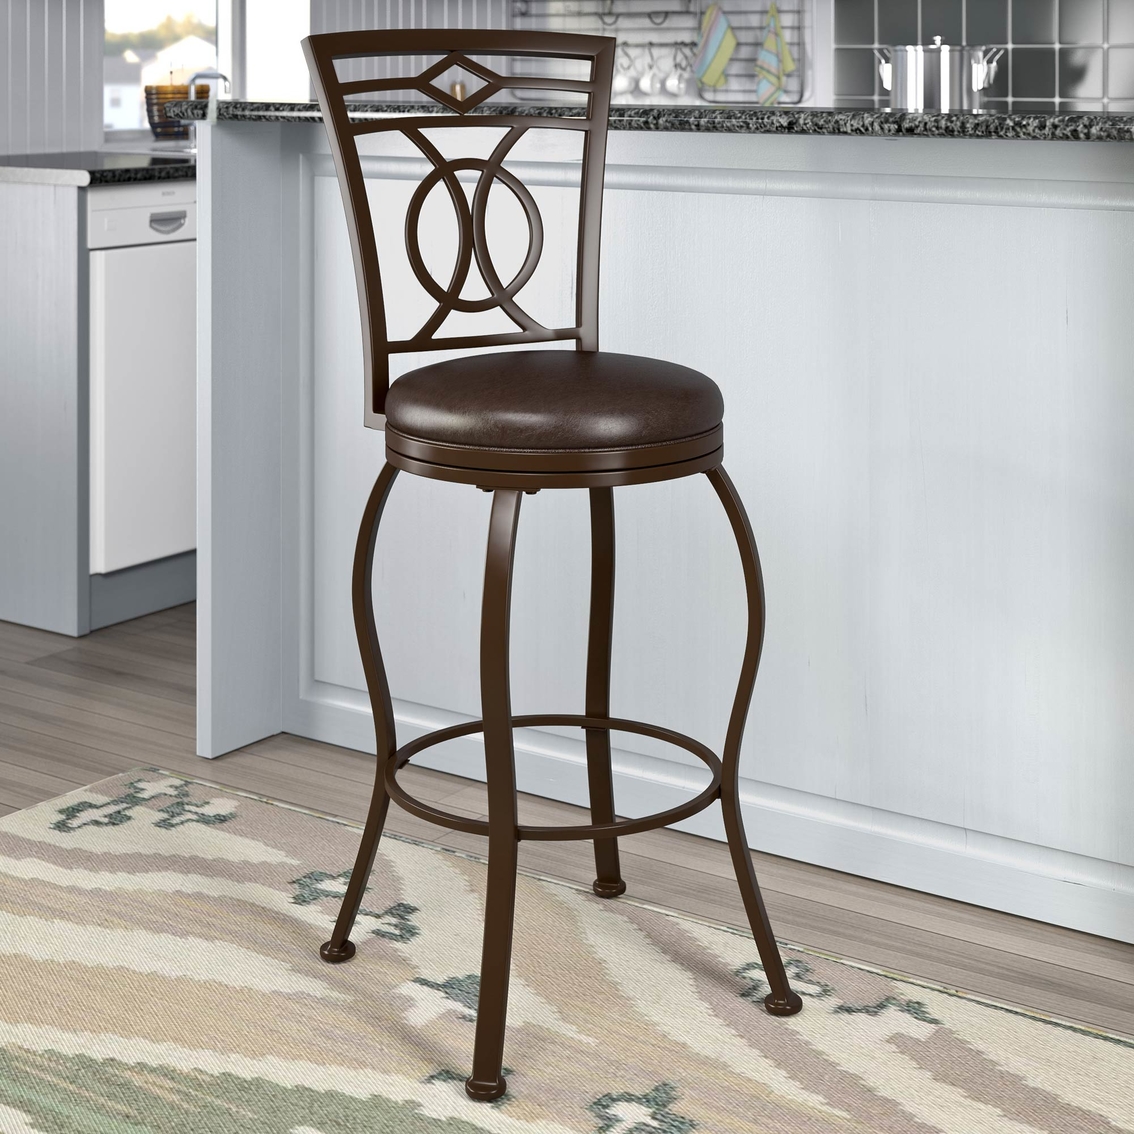 CorLiving DJS-823-B Metal Bar Height Barstool with Dark Brown Bonded Leather Seat - Image 3 of 3